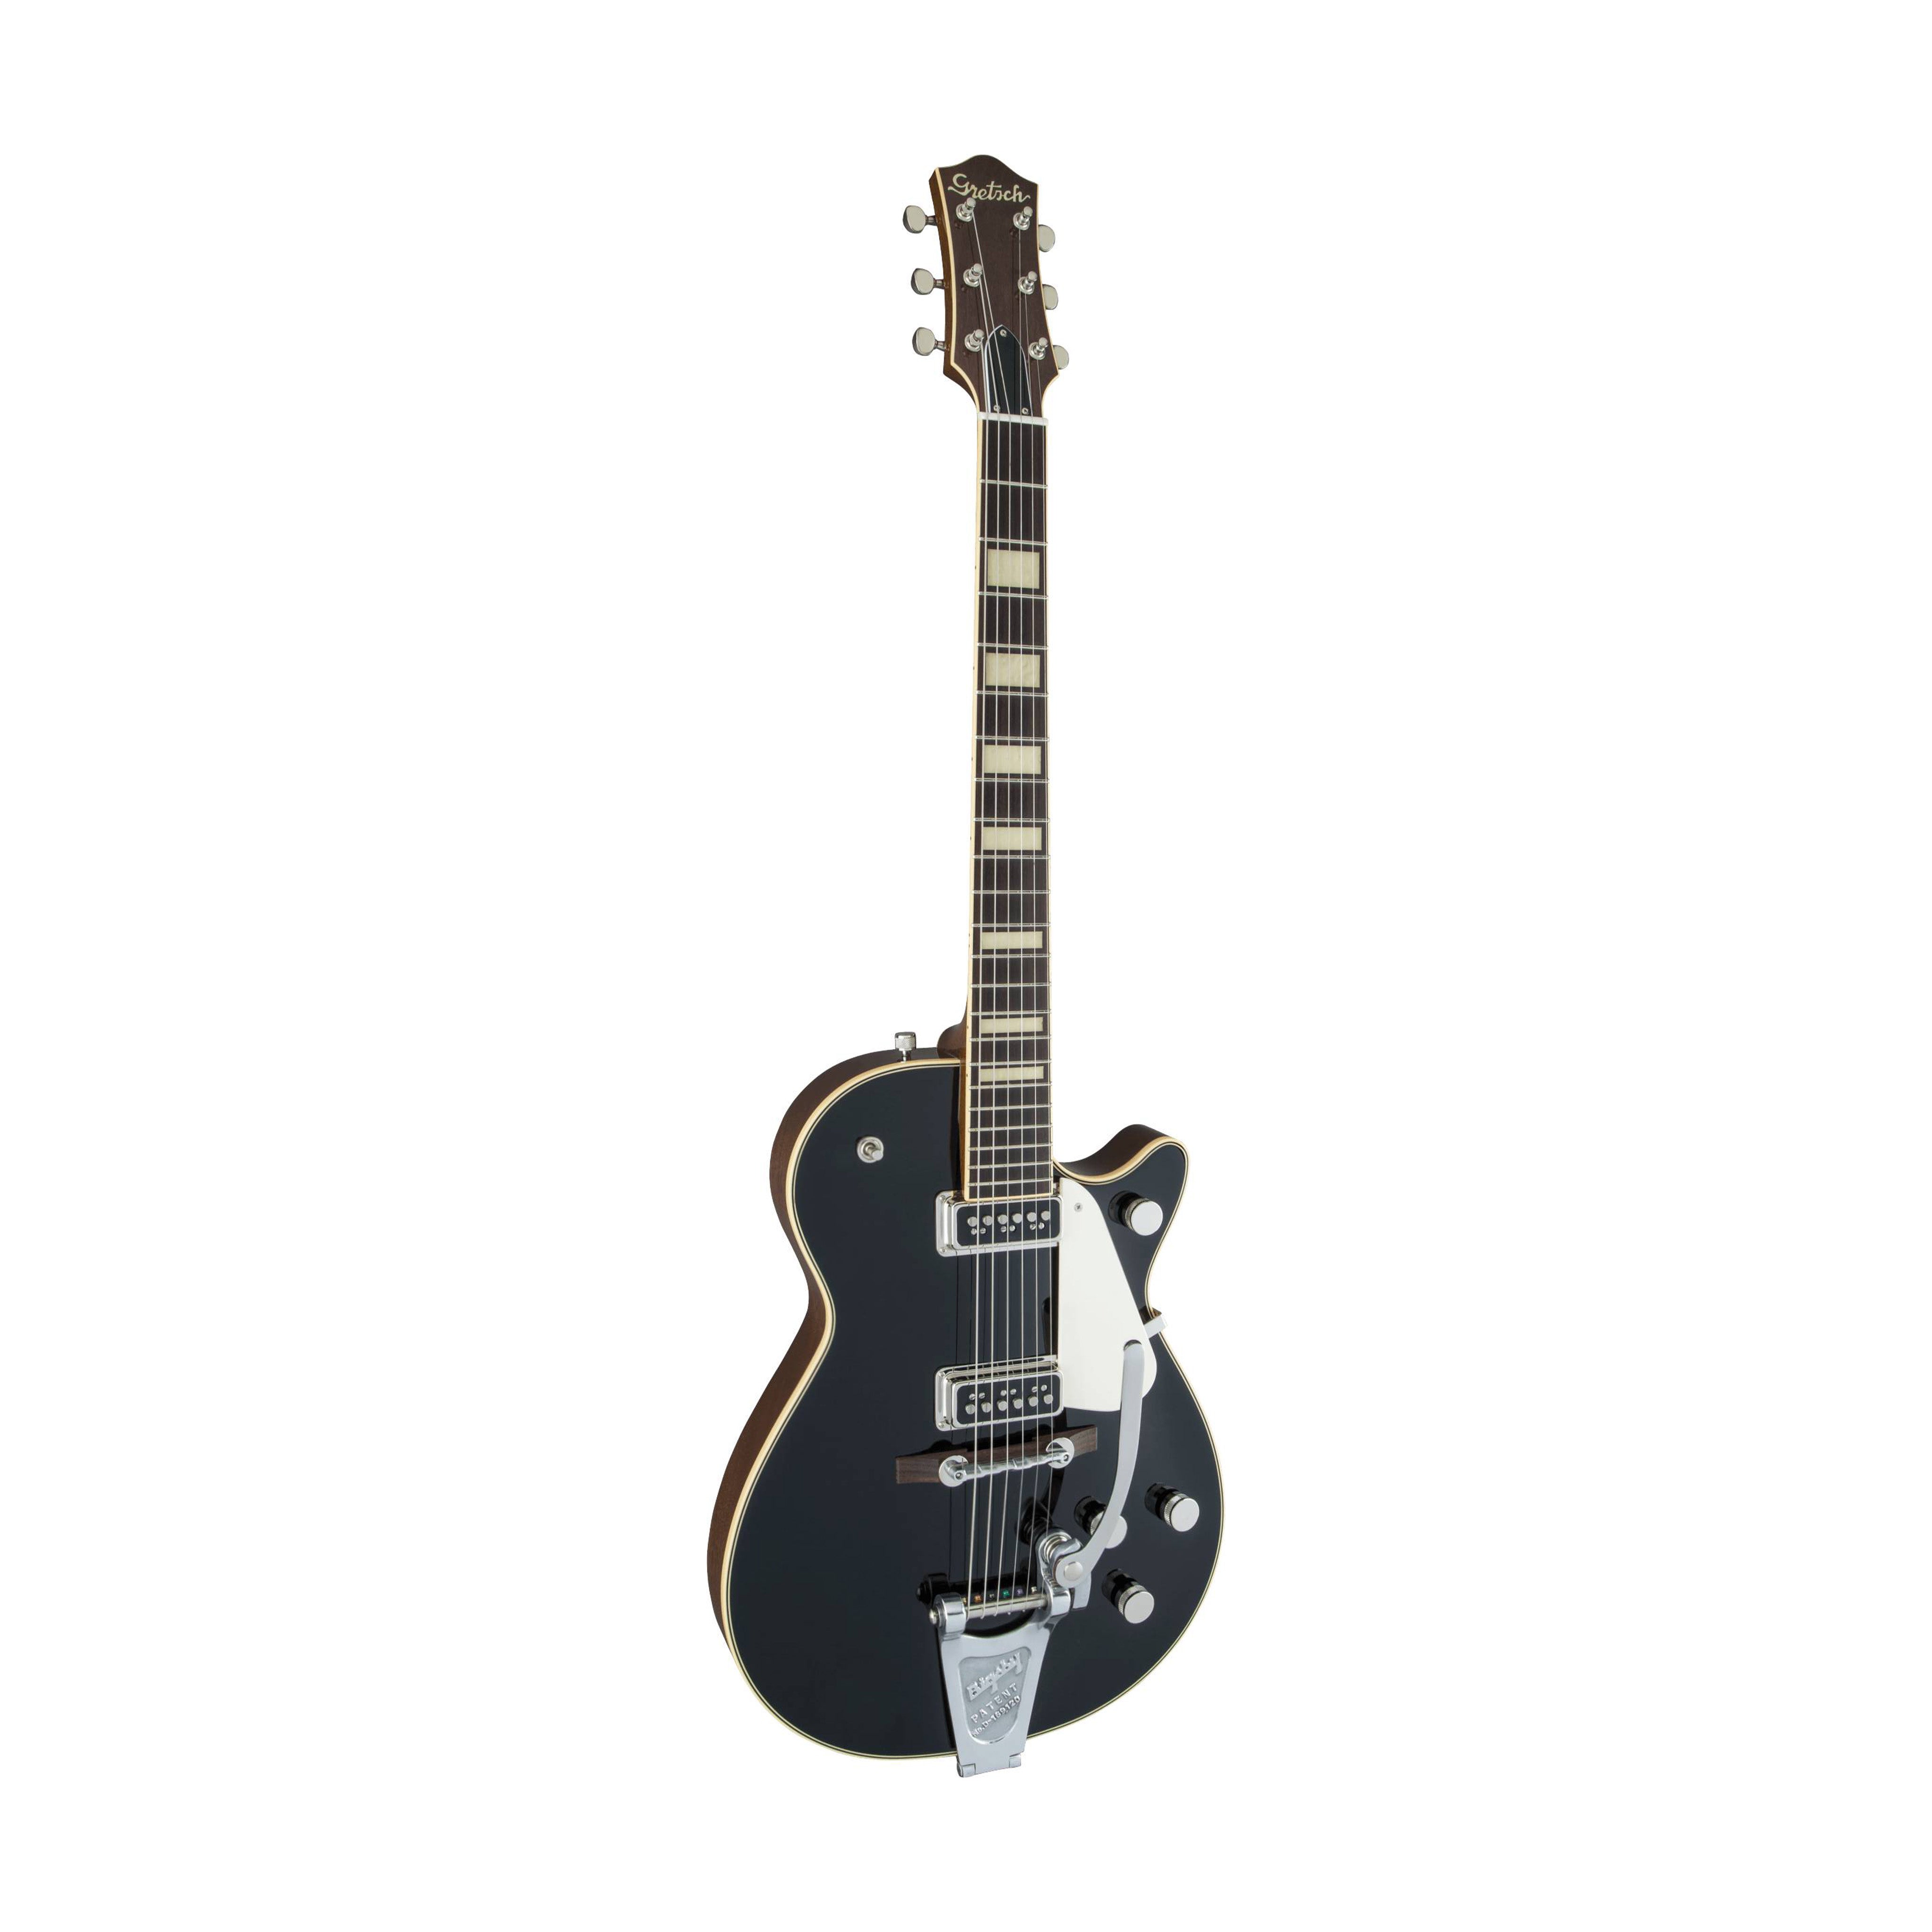 Gretsch G6128T-53 Vintage Select 53 Duo Jet Electric Guitar w/ Bigsby, Black